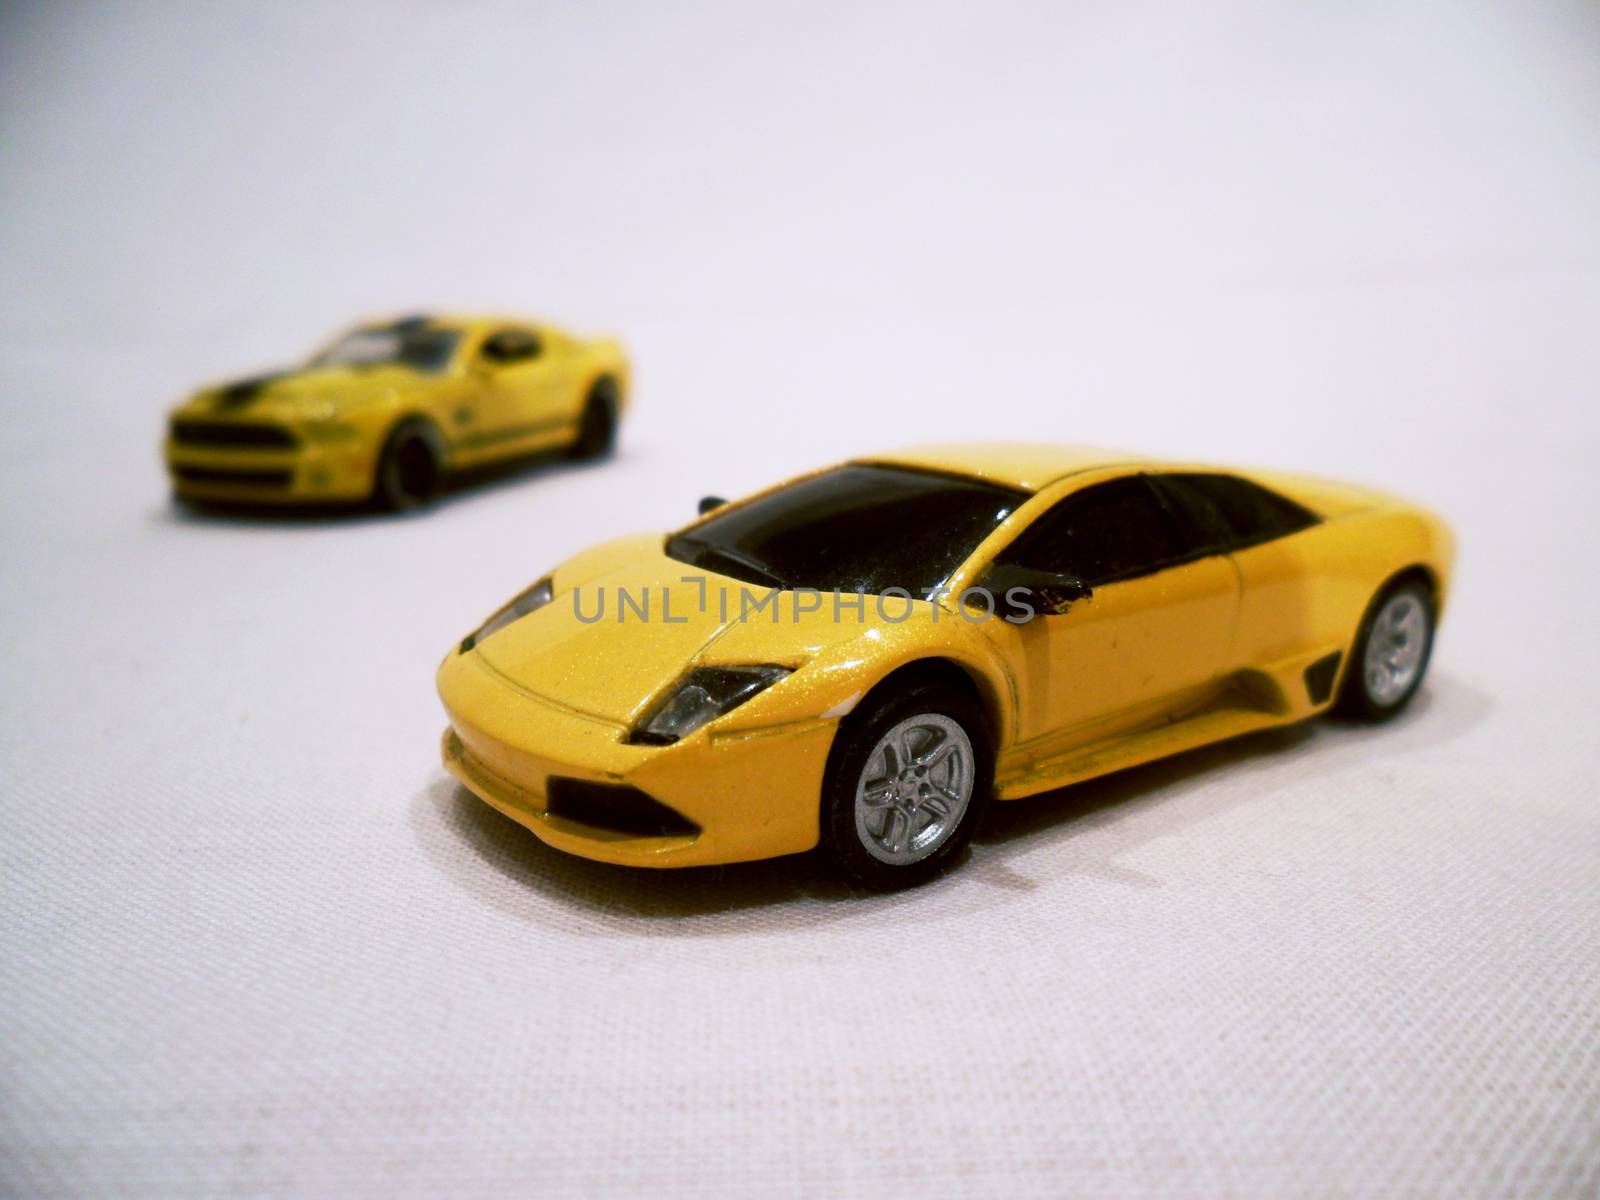 two yellow toy sports cars next to eachother on white sheet